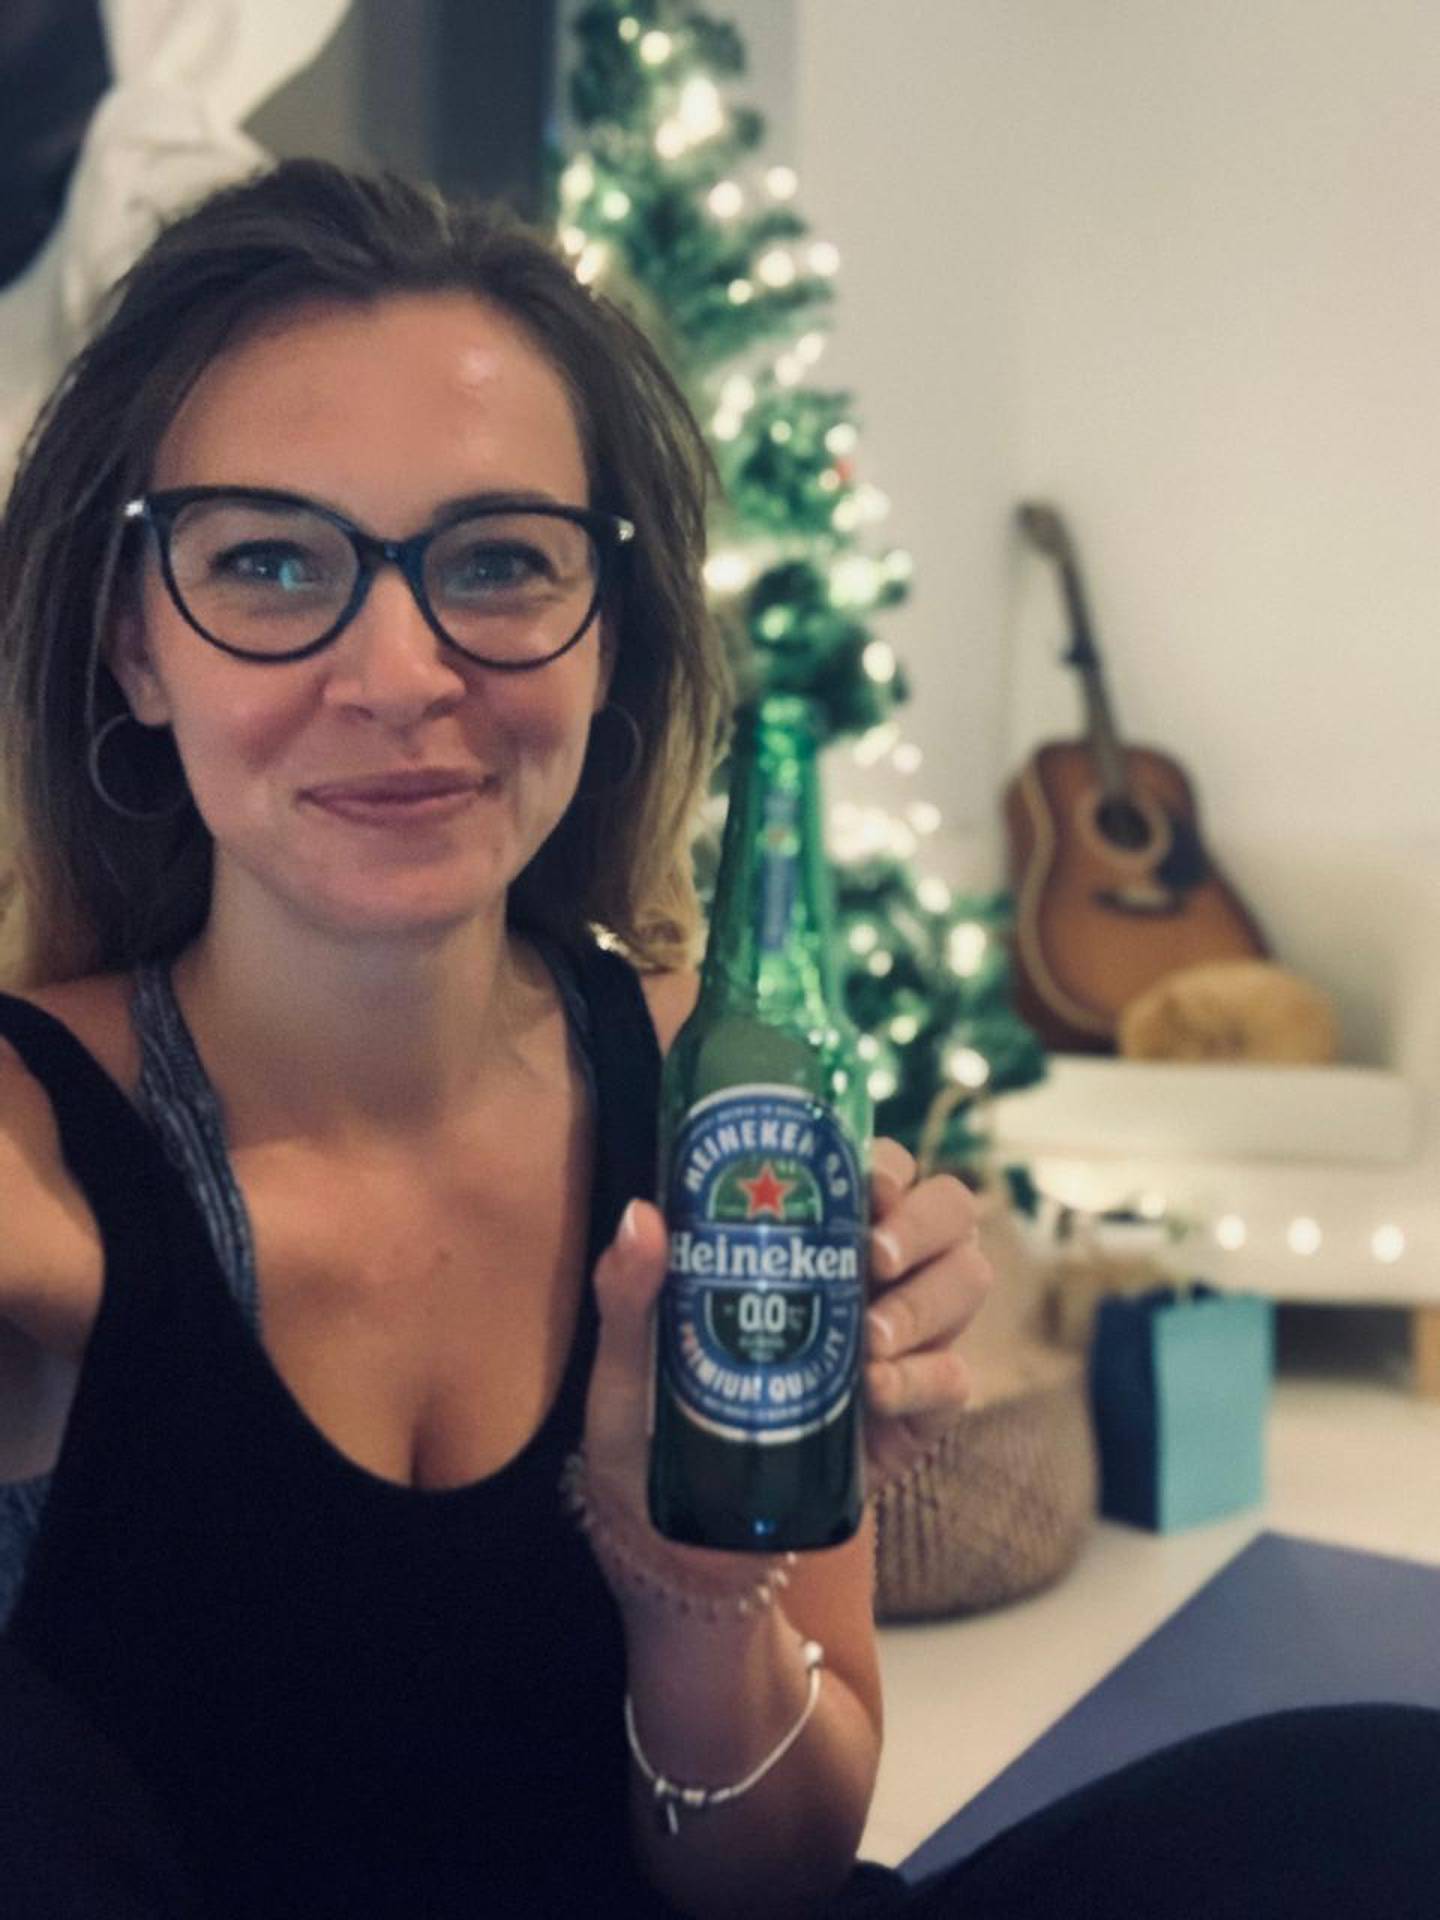 Abu Dhabi resident Alex McRobert, who runs Sober Girls Yoga, welcomed the influx of alcohol-free beers and spirits into the UAE. Courtesy: Alex McRobert